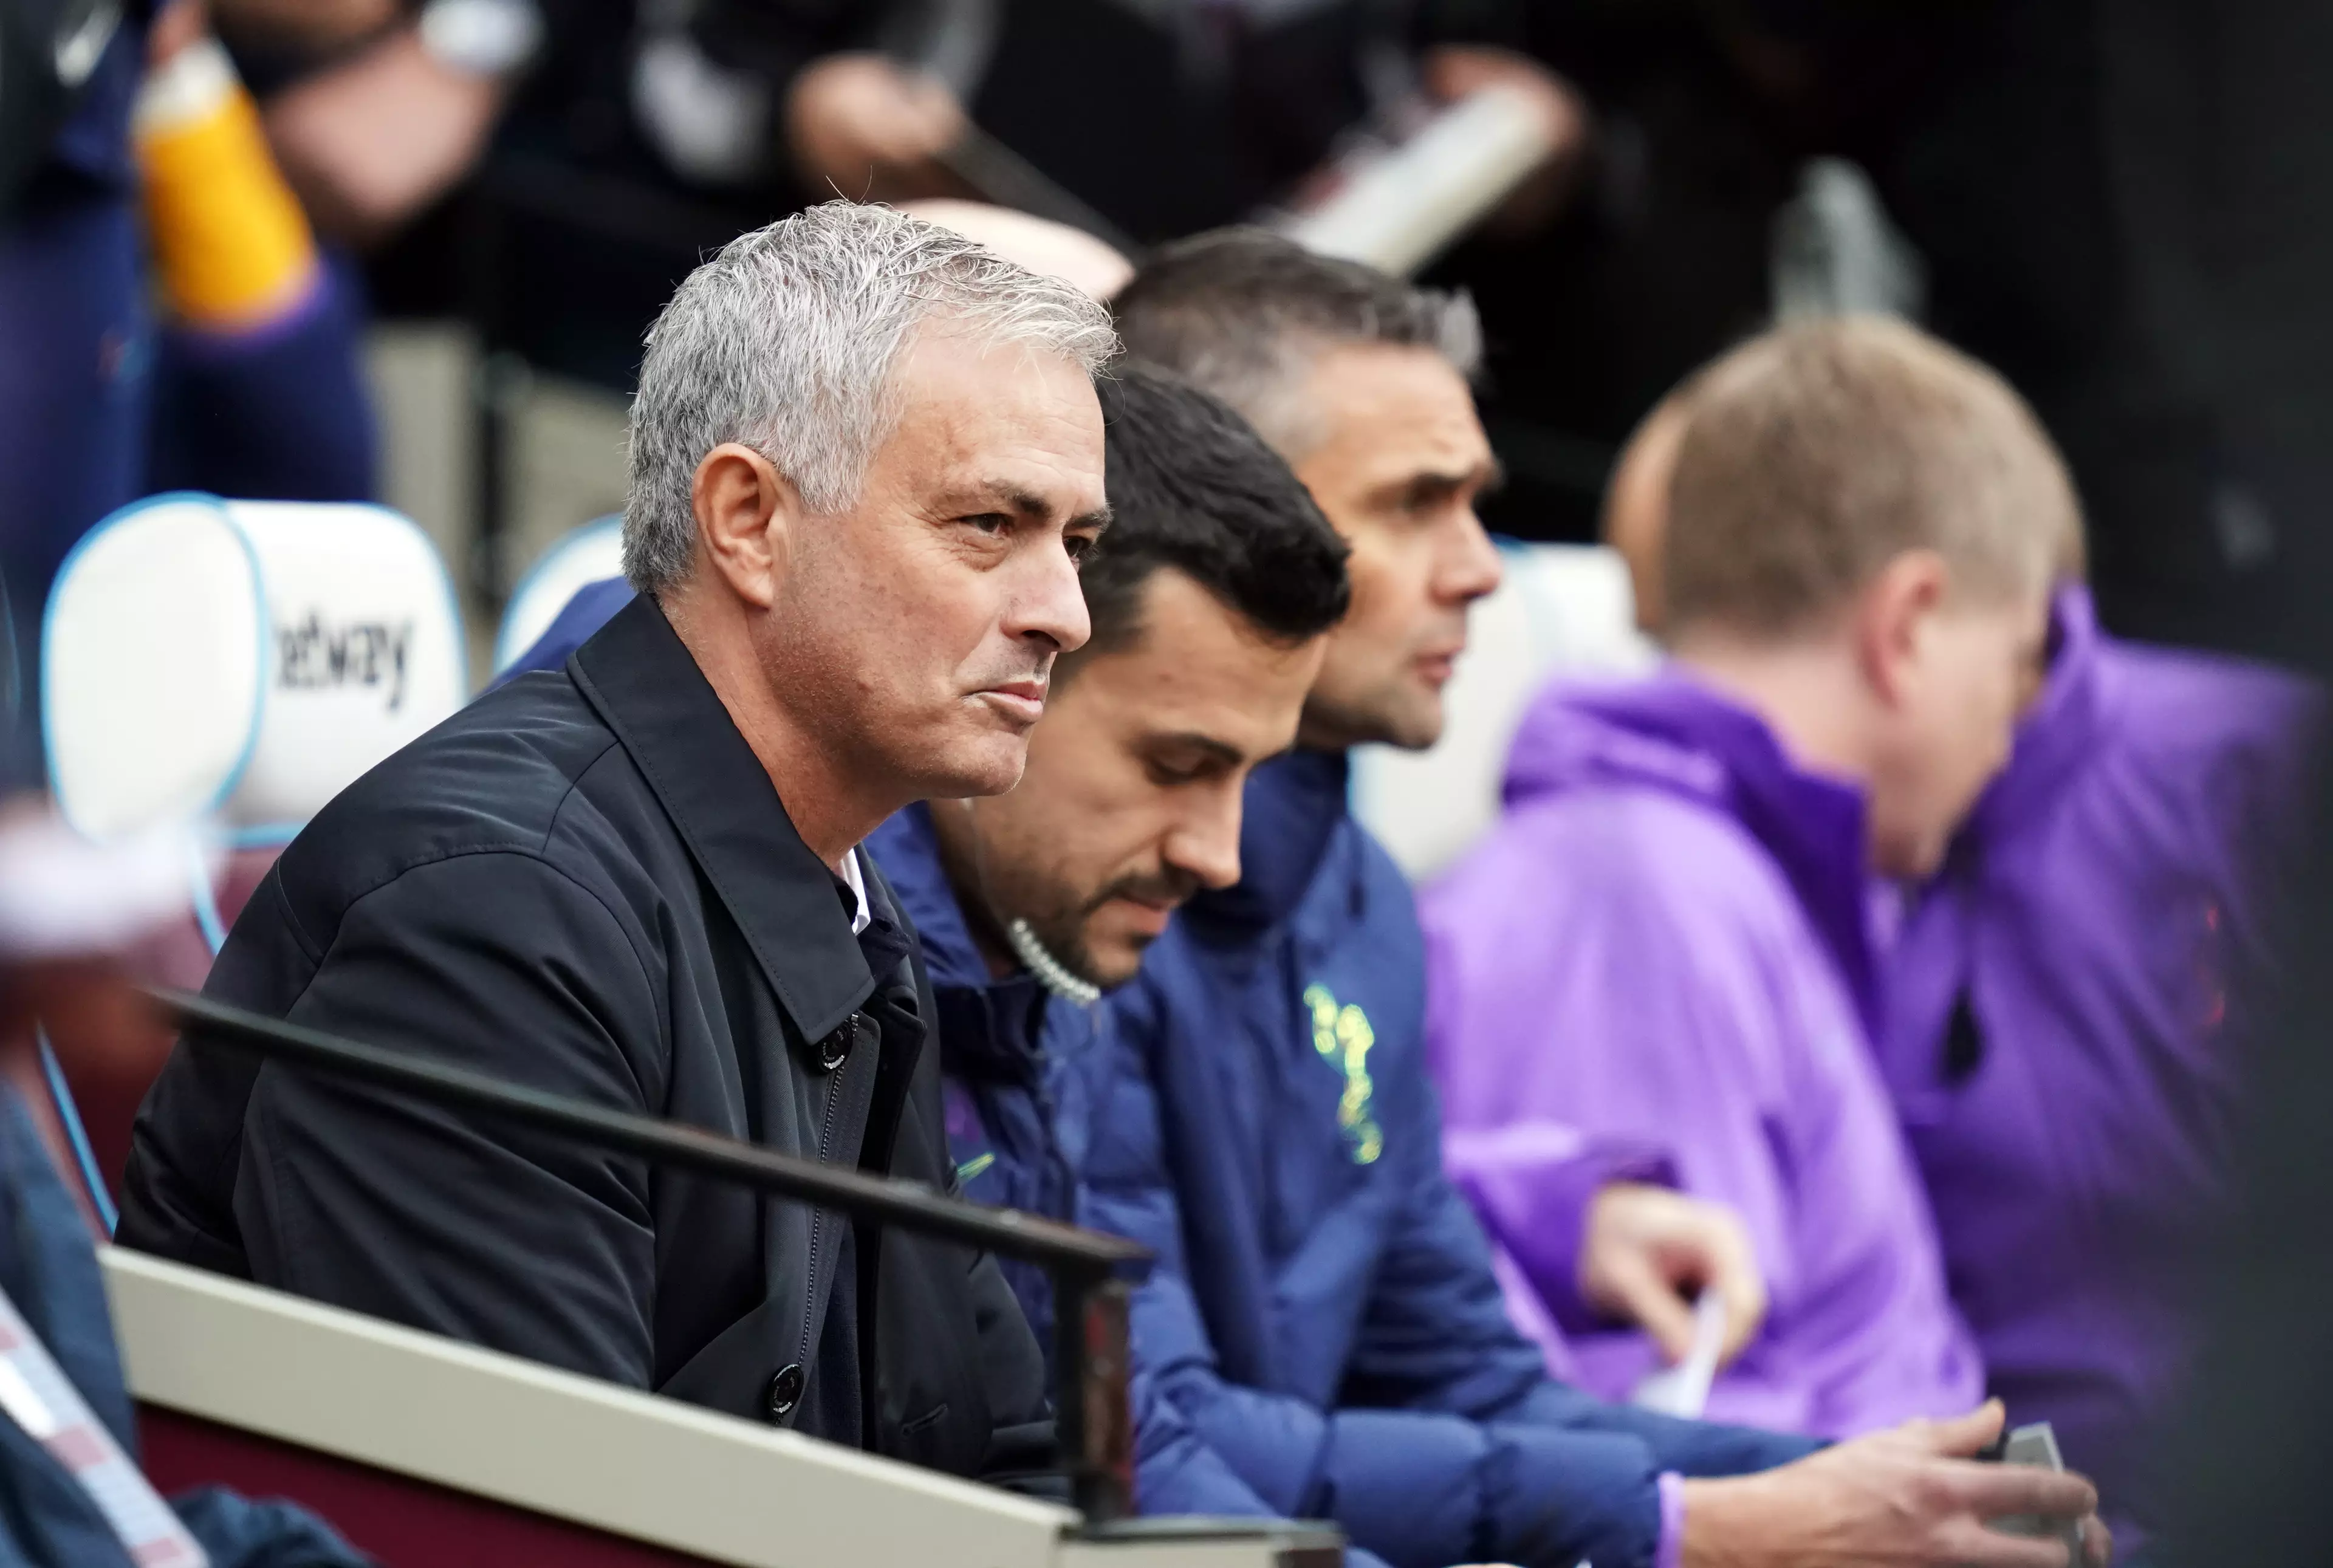 Jose Mourinho was back in the Premier League dugout in charge of Tottenham at West Ham